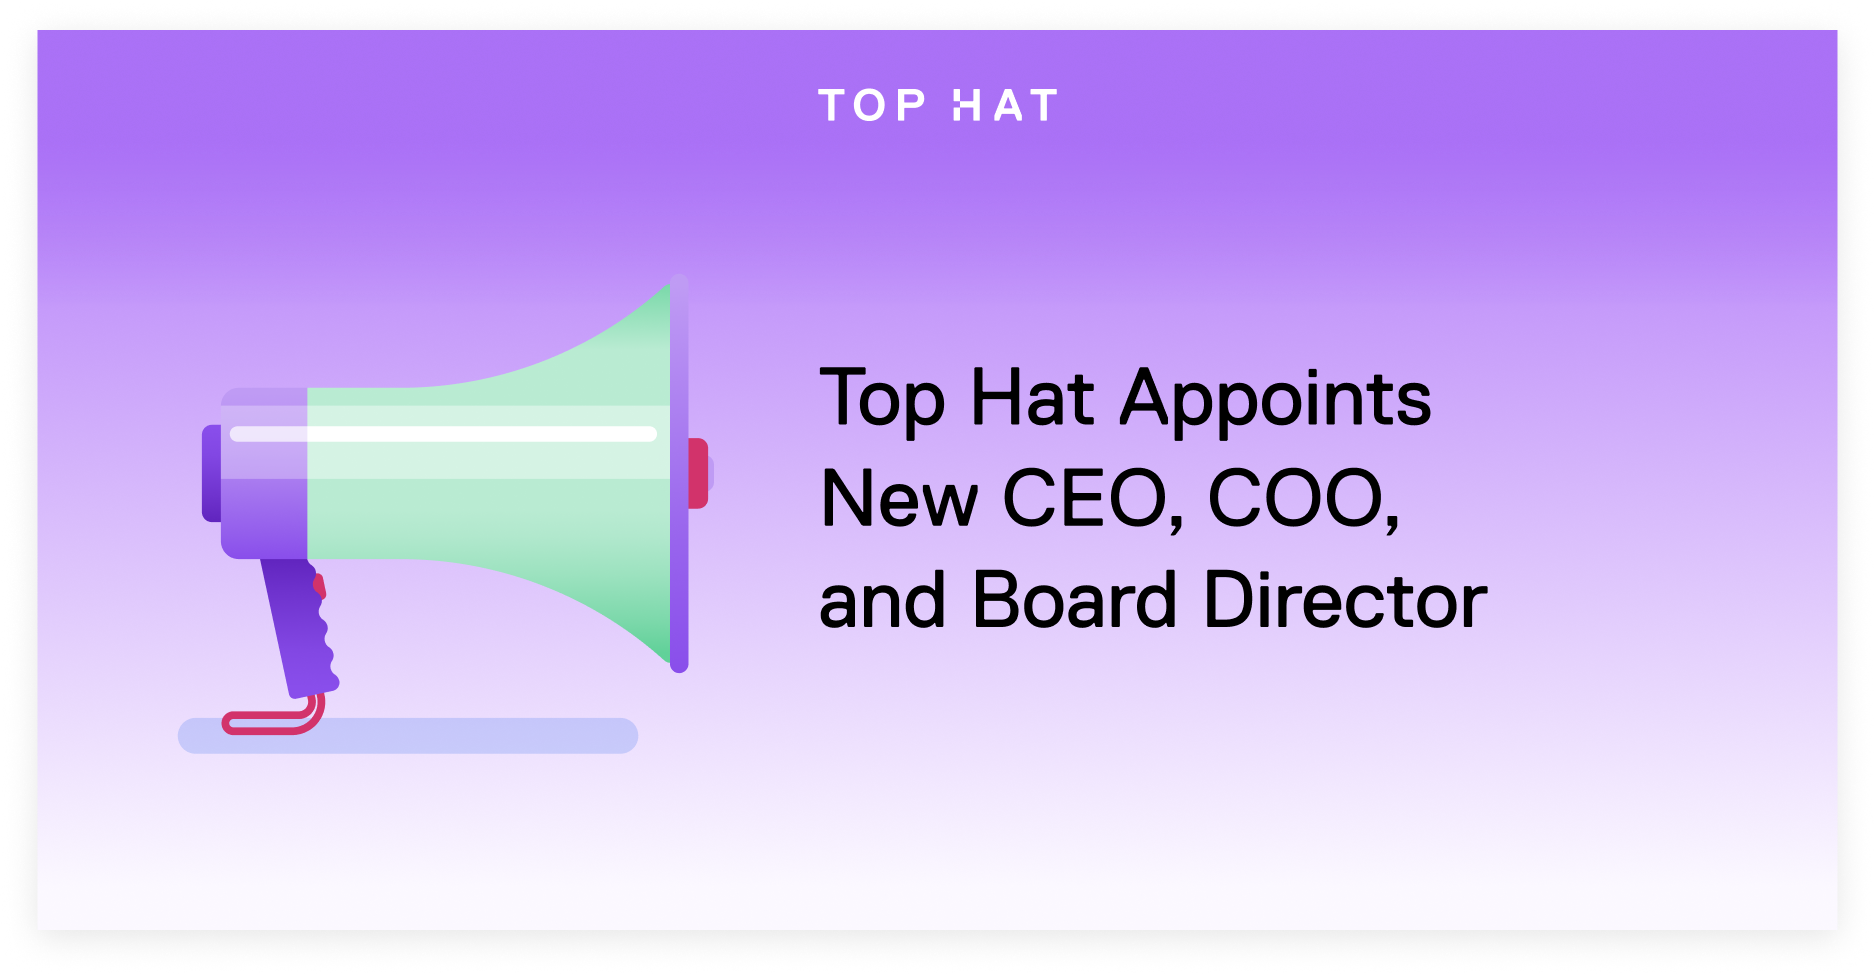 Top Hat Leadership Appointments Fuel Mission of Improving Teaching and Learning